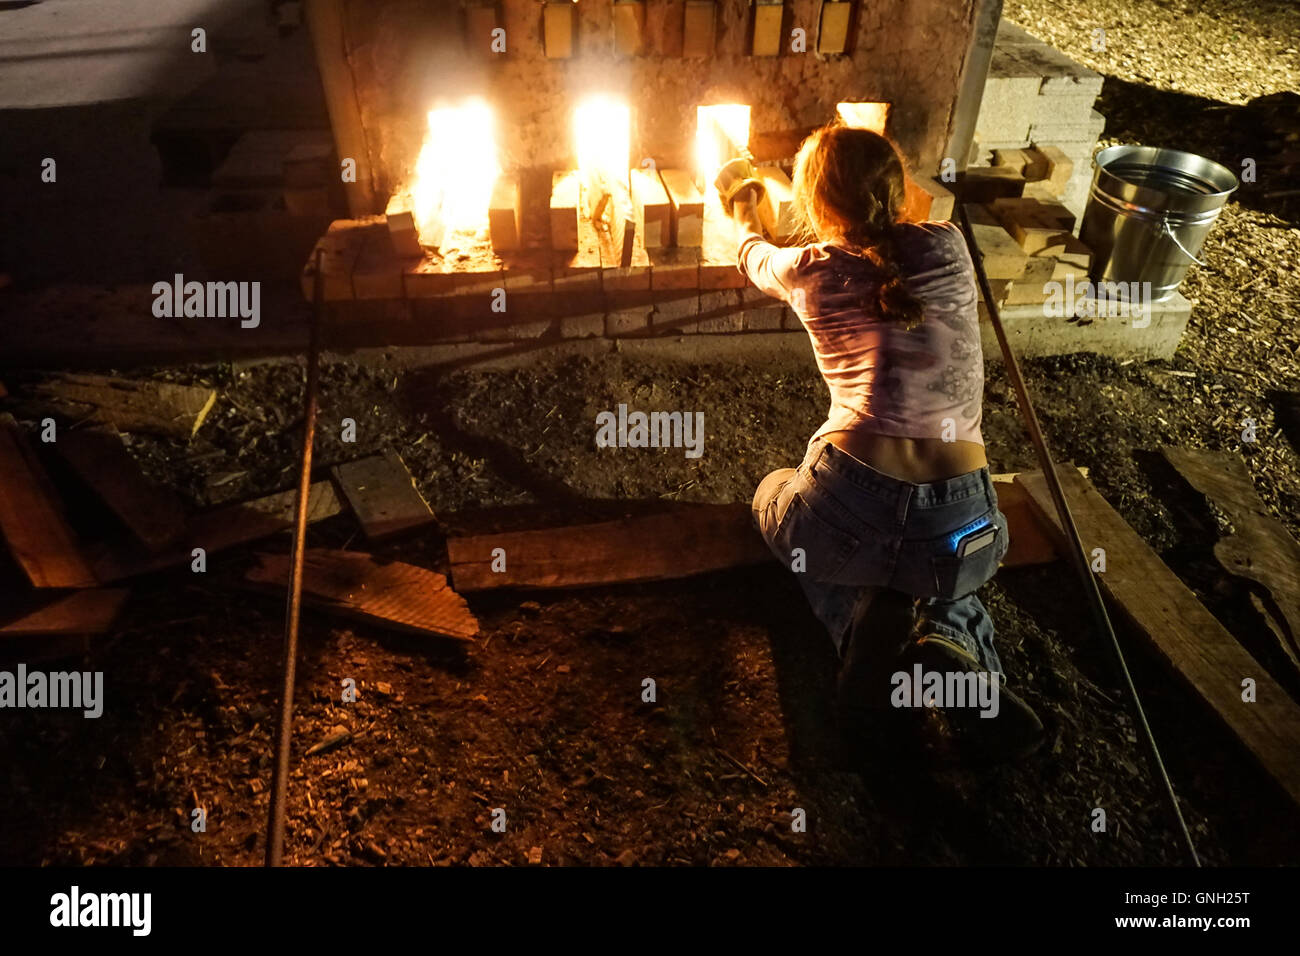 Woman tending to fire of wood kiln at night Stock Photo